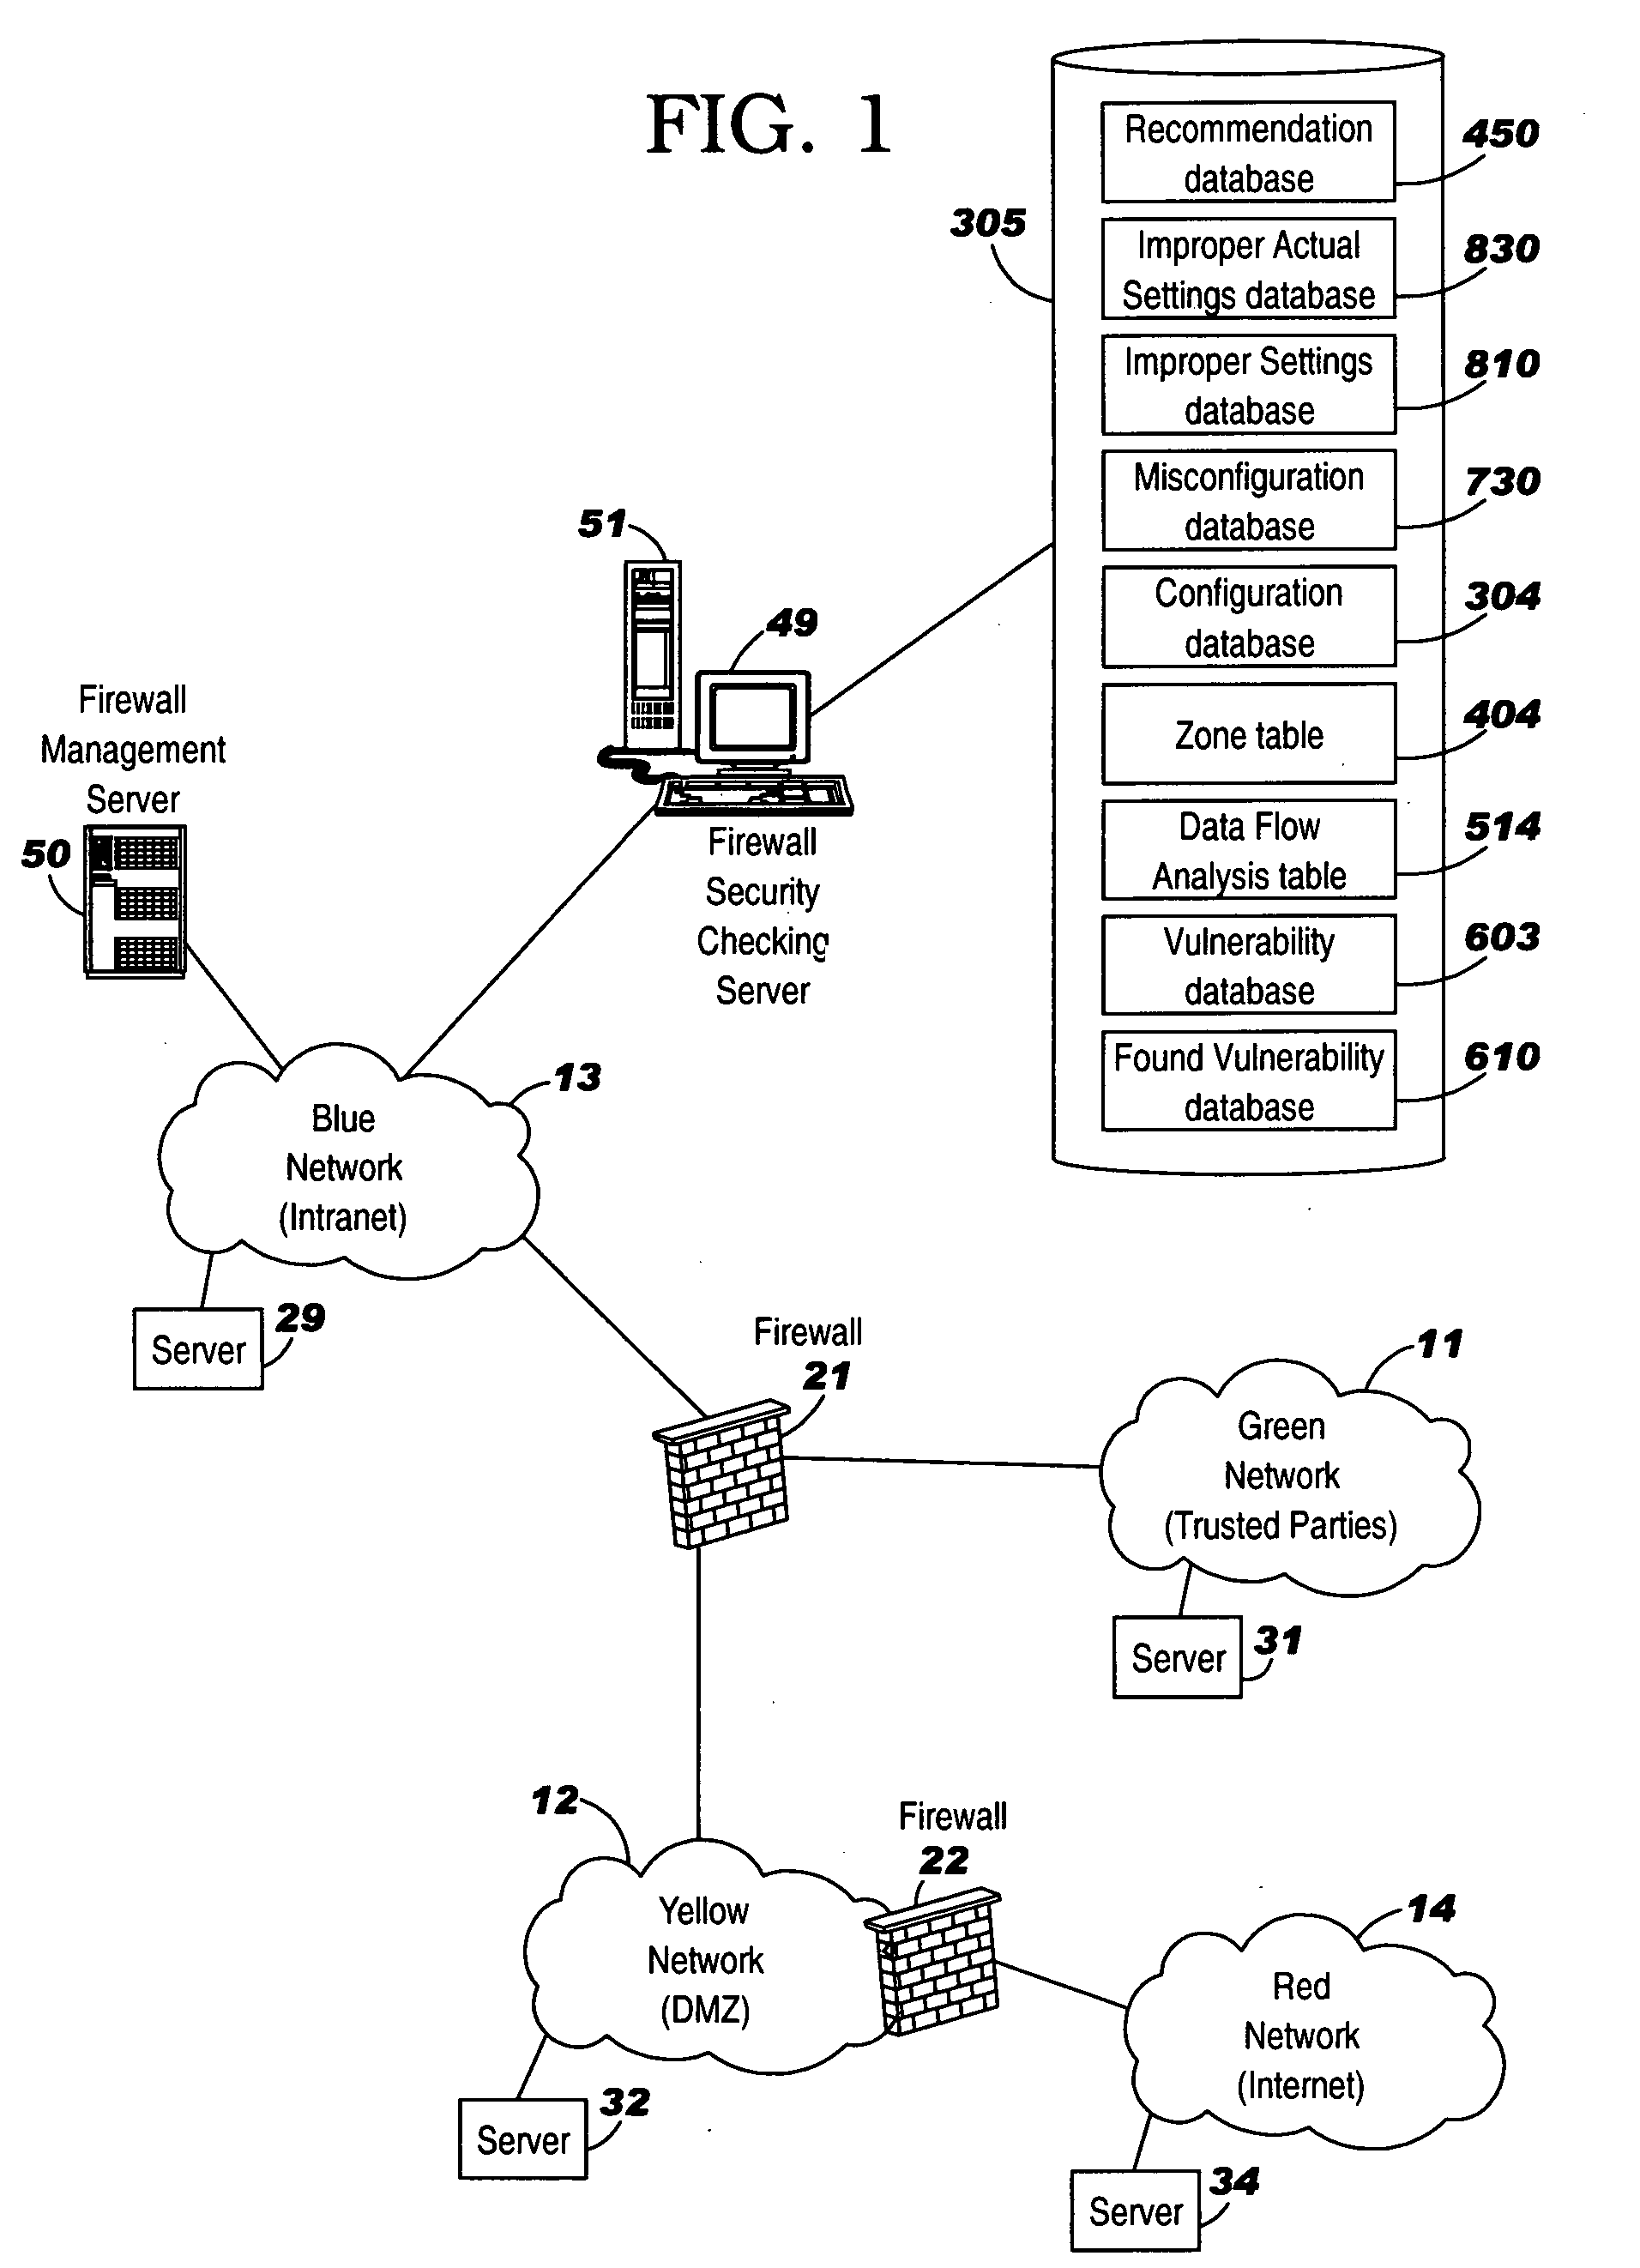 Method and apparatus for graphical presentation of firewall security policy